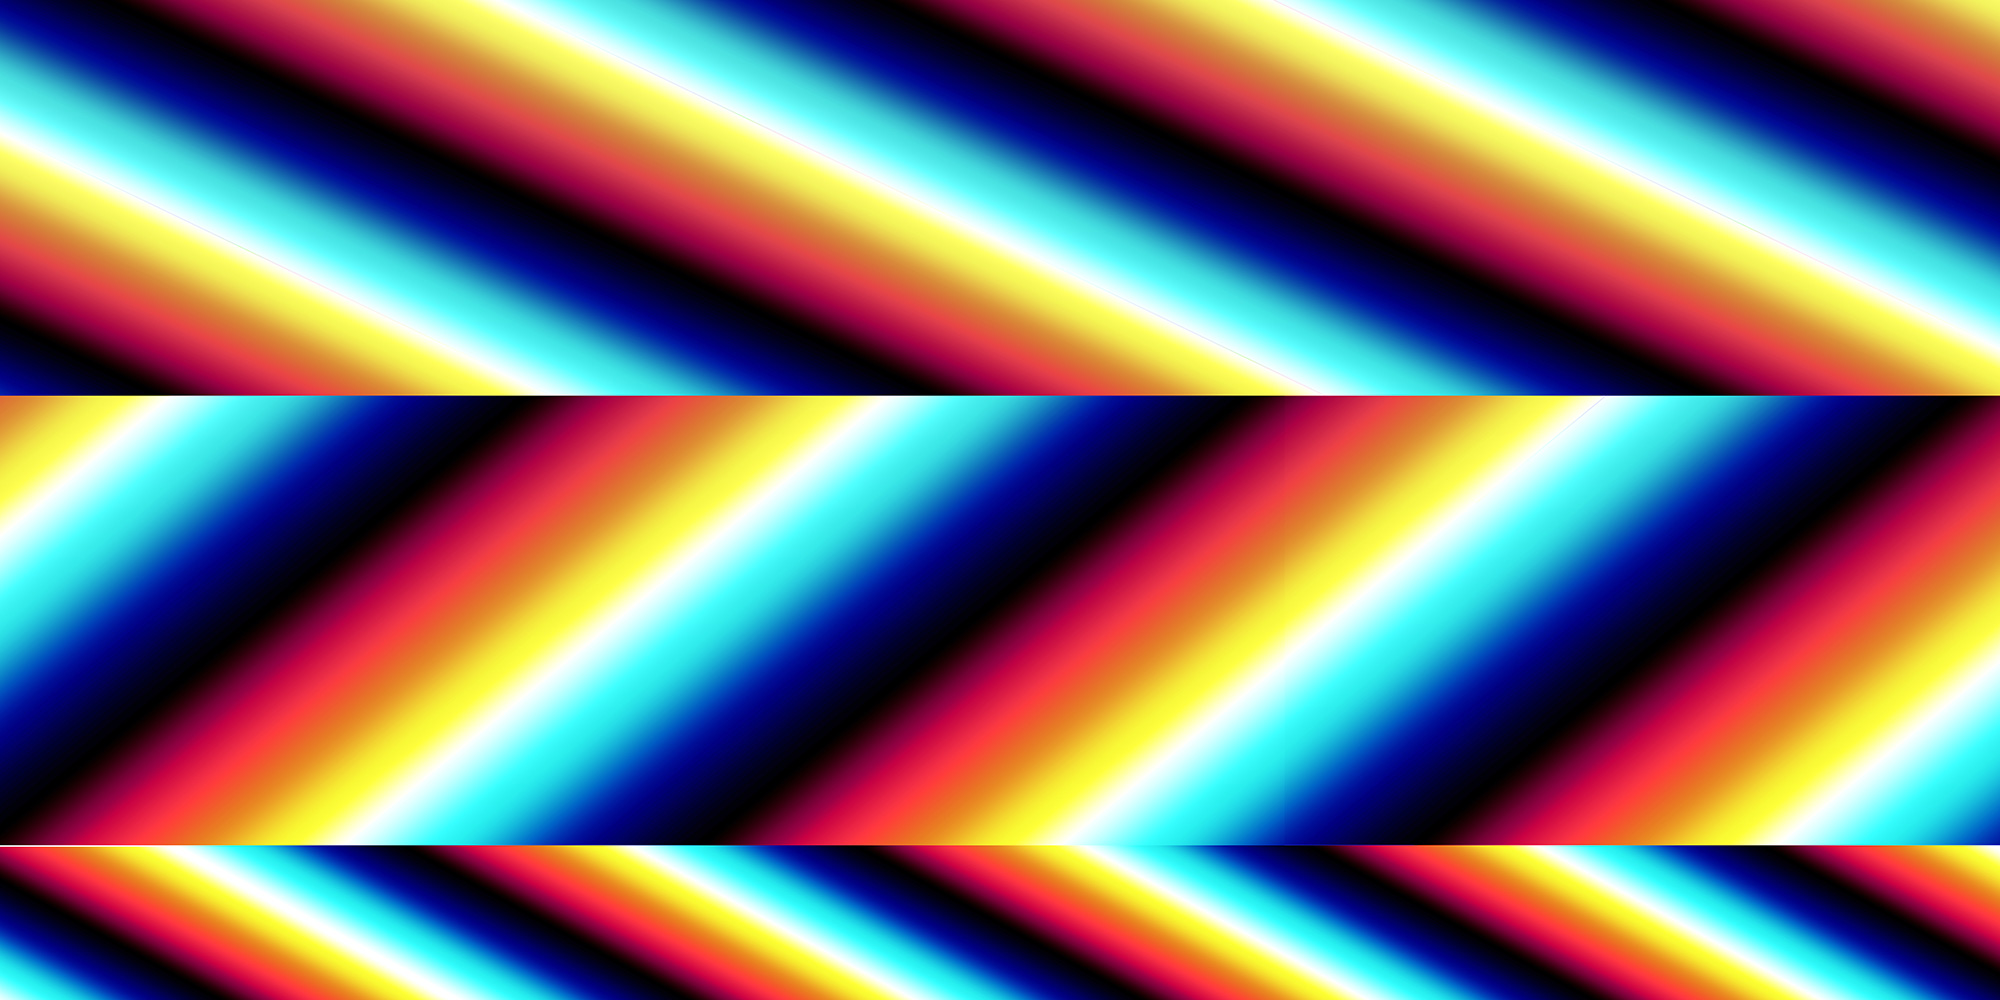 This artwork is a digital interpretation of a serape. The picture plane is divided into three horizontal bands of color, stacked one on top of another. Each of the three bands is composed of gradations of color, from sky blue to deep red. The gradations in the top band angle to the left; those in the central band angle to the right; and those in the bottom band angle to the left again.